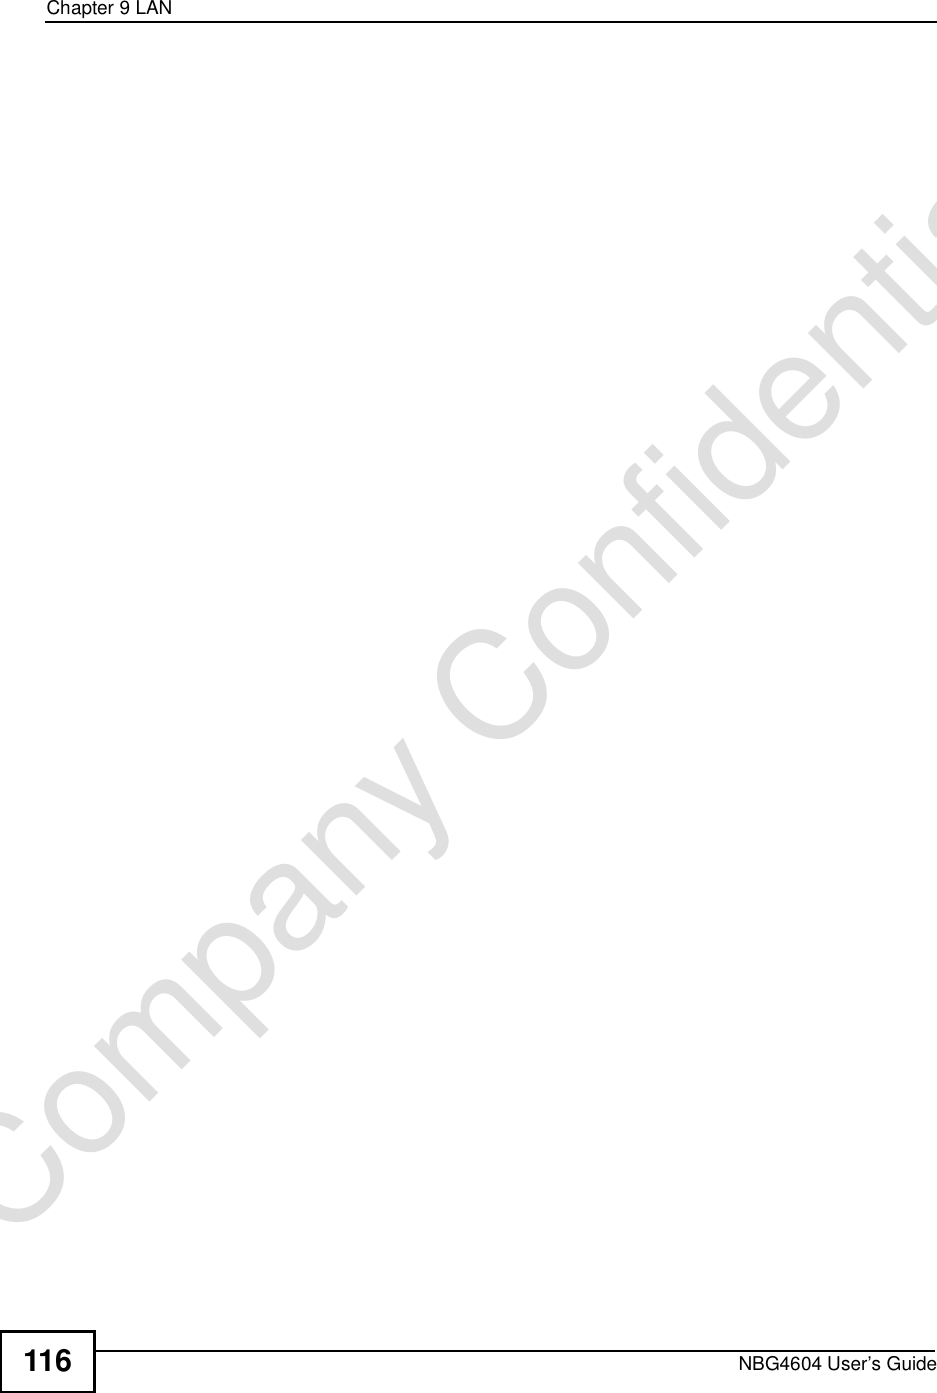 Chapter 9LANNBG4604 User’s Guide116Company Confidential